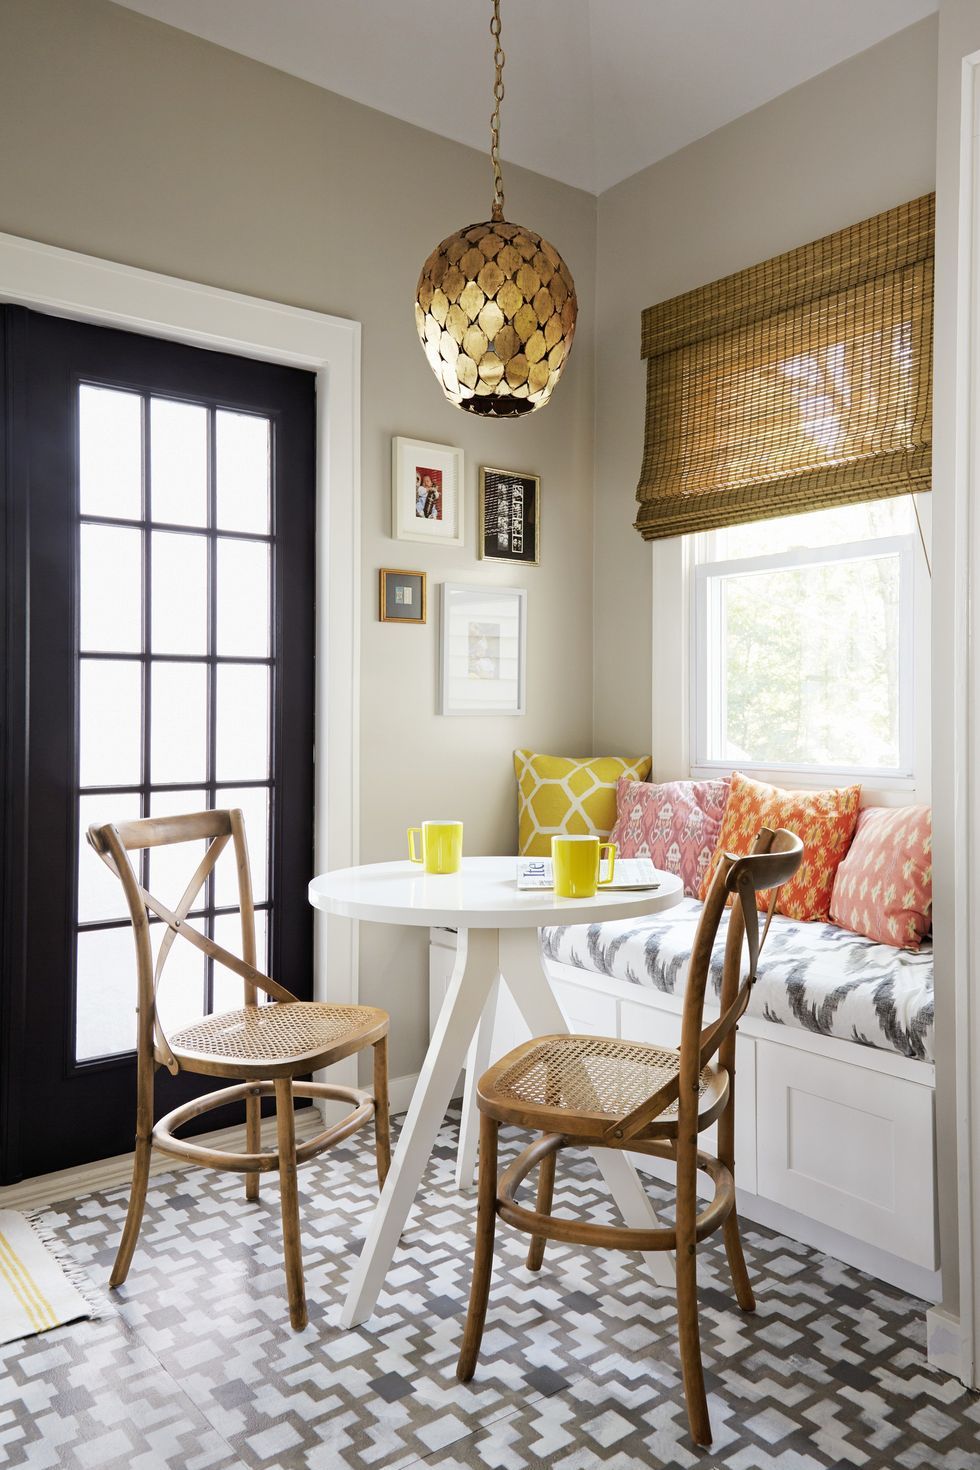 15 Small Dining Room Ideas - How to Decorate Your Small Dining Room